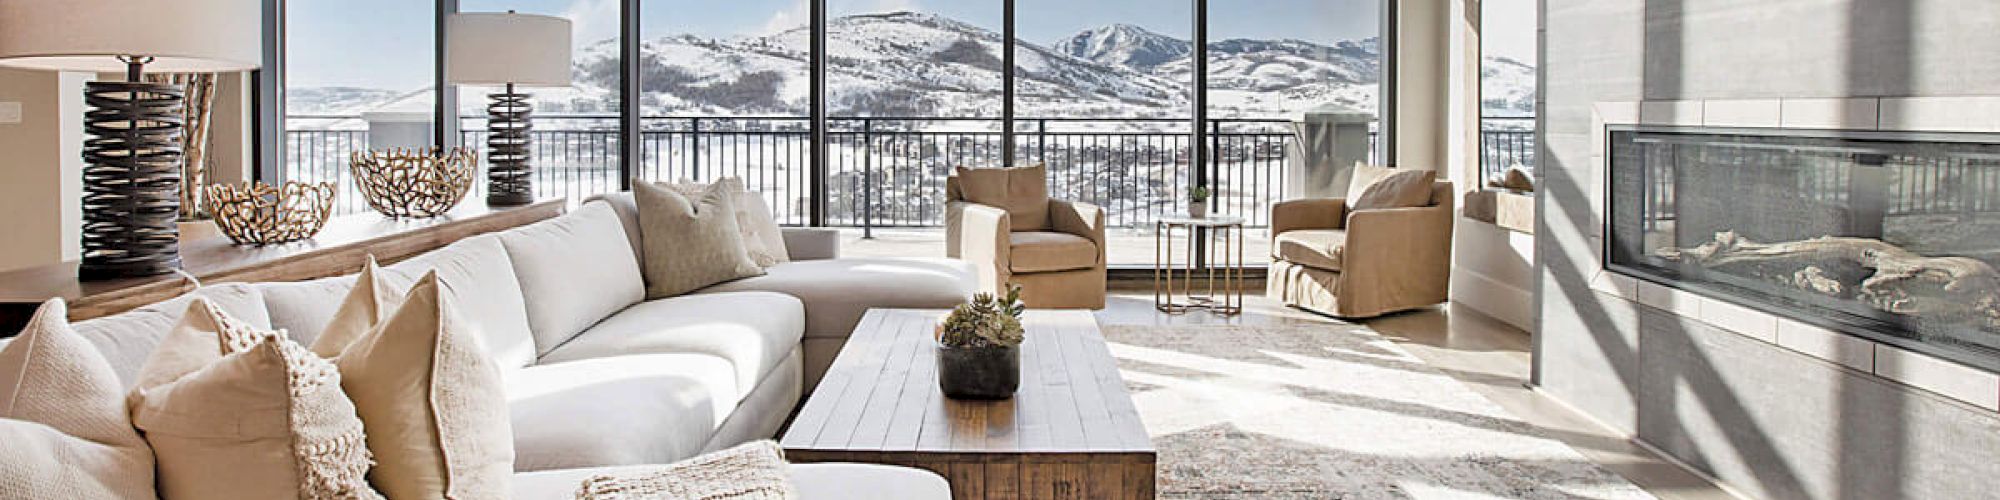 A modern living room with a large sofa, a fireplace, and floor-to-ceiling windows offering a scenic view of snow-covered mountains.